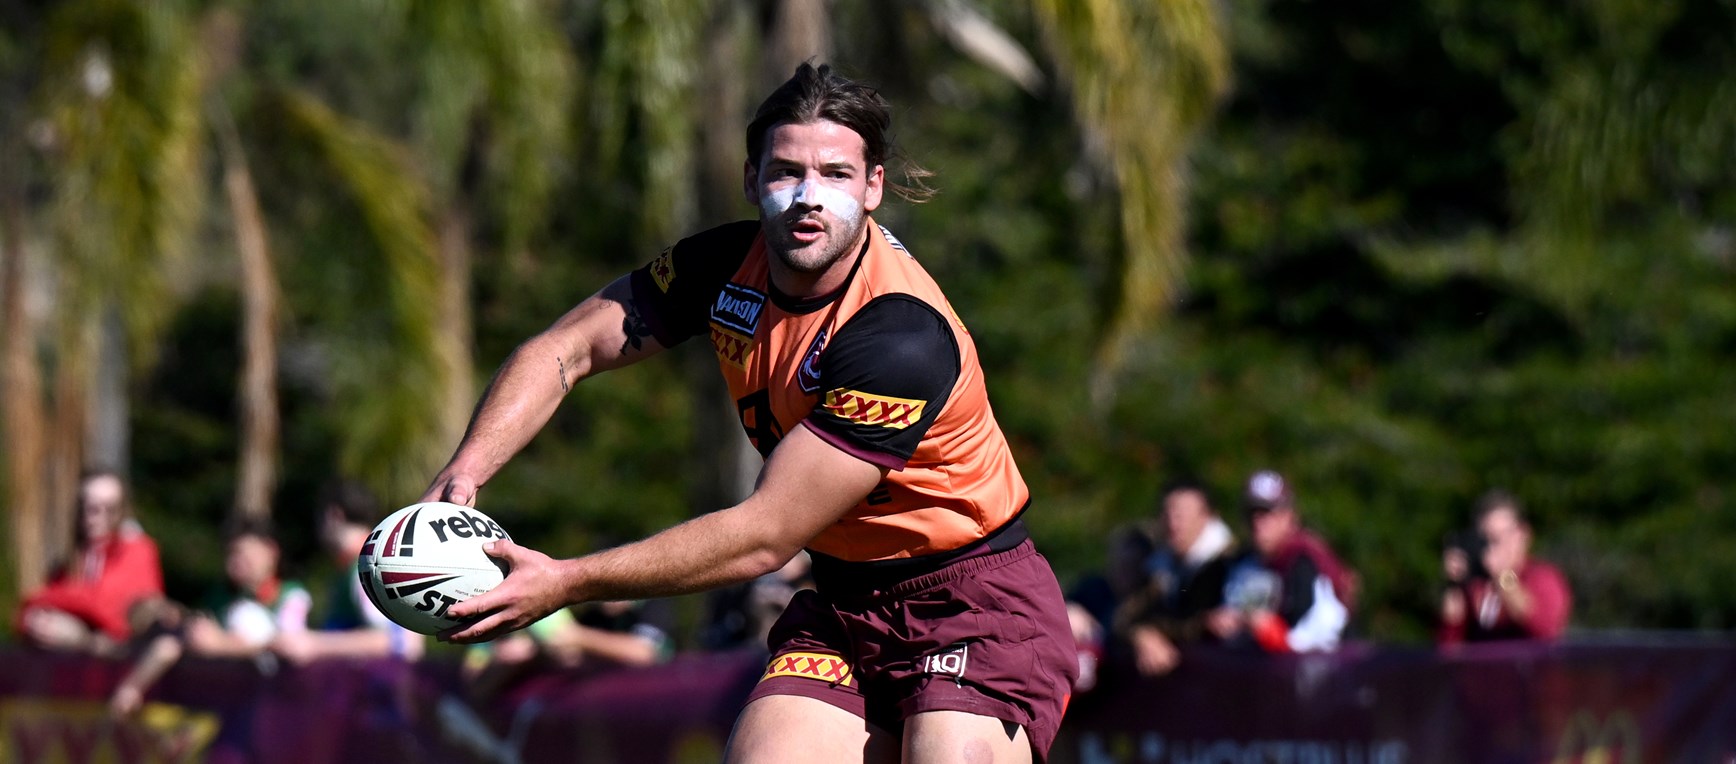 In pictures: Maroons ramp up intensity at training